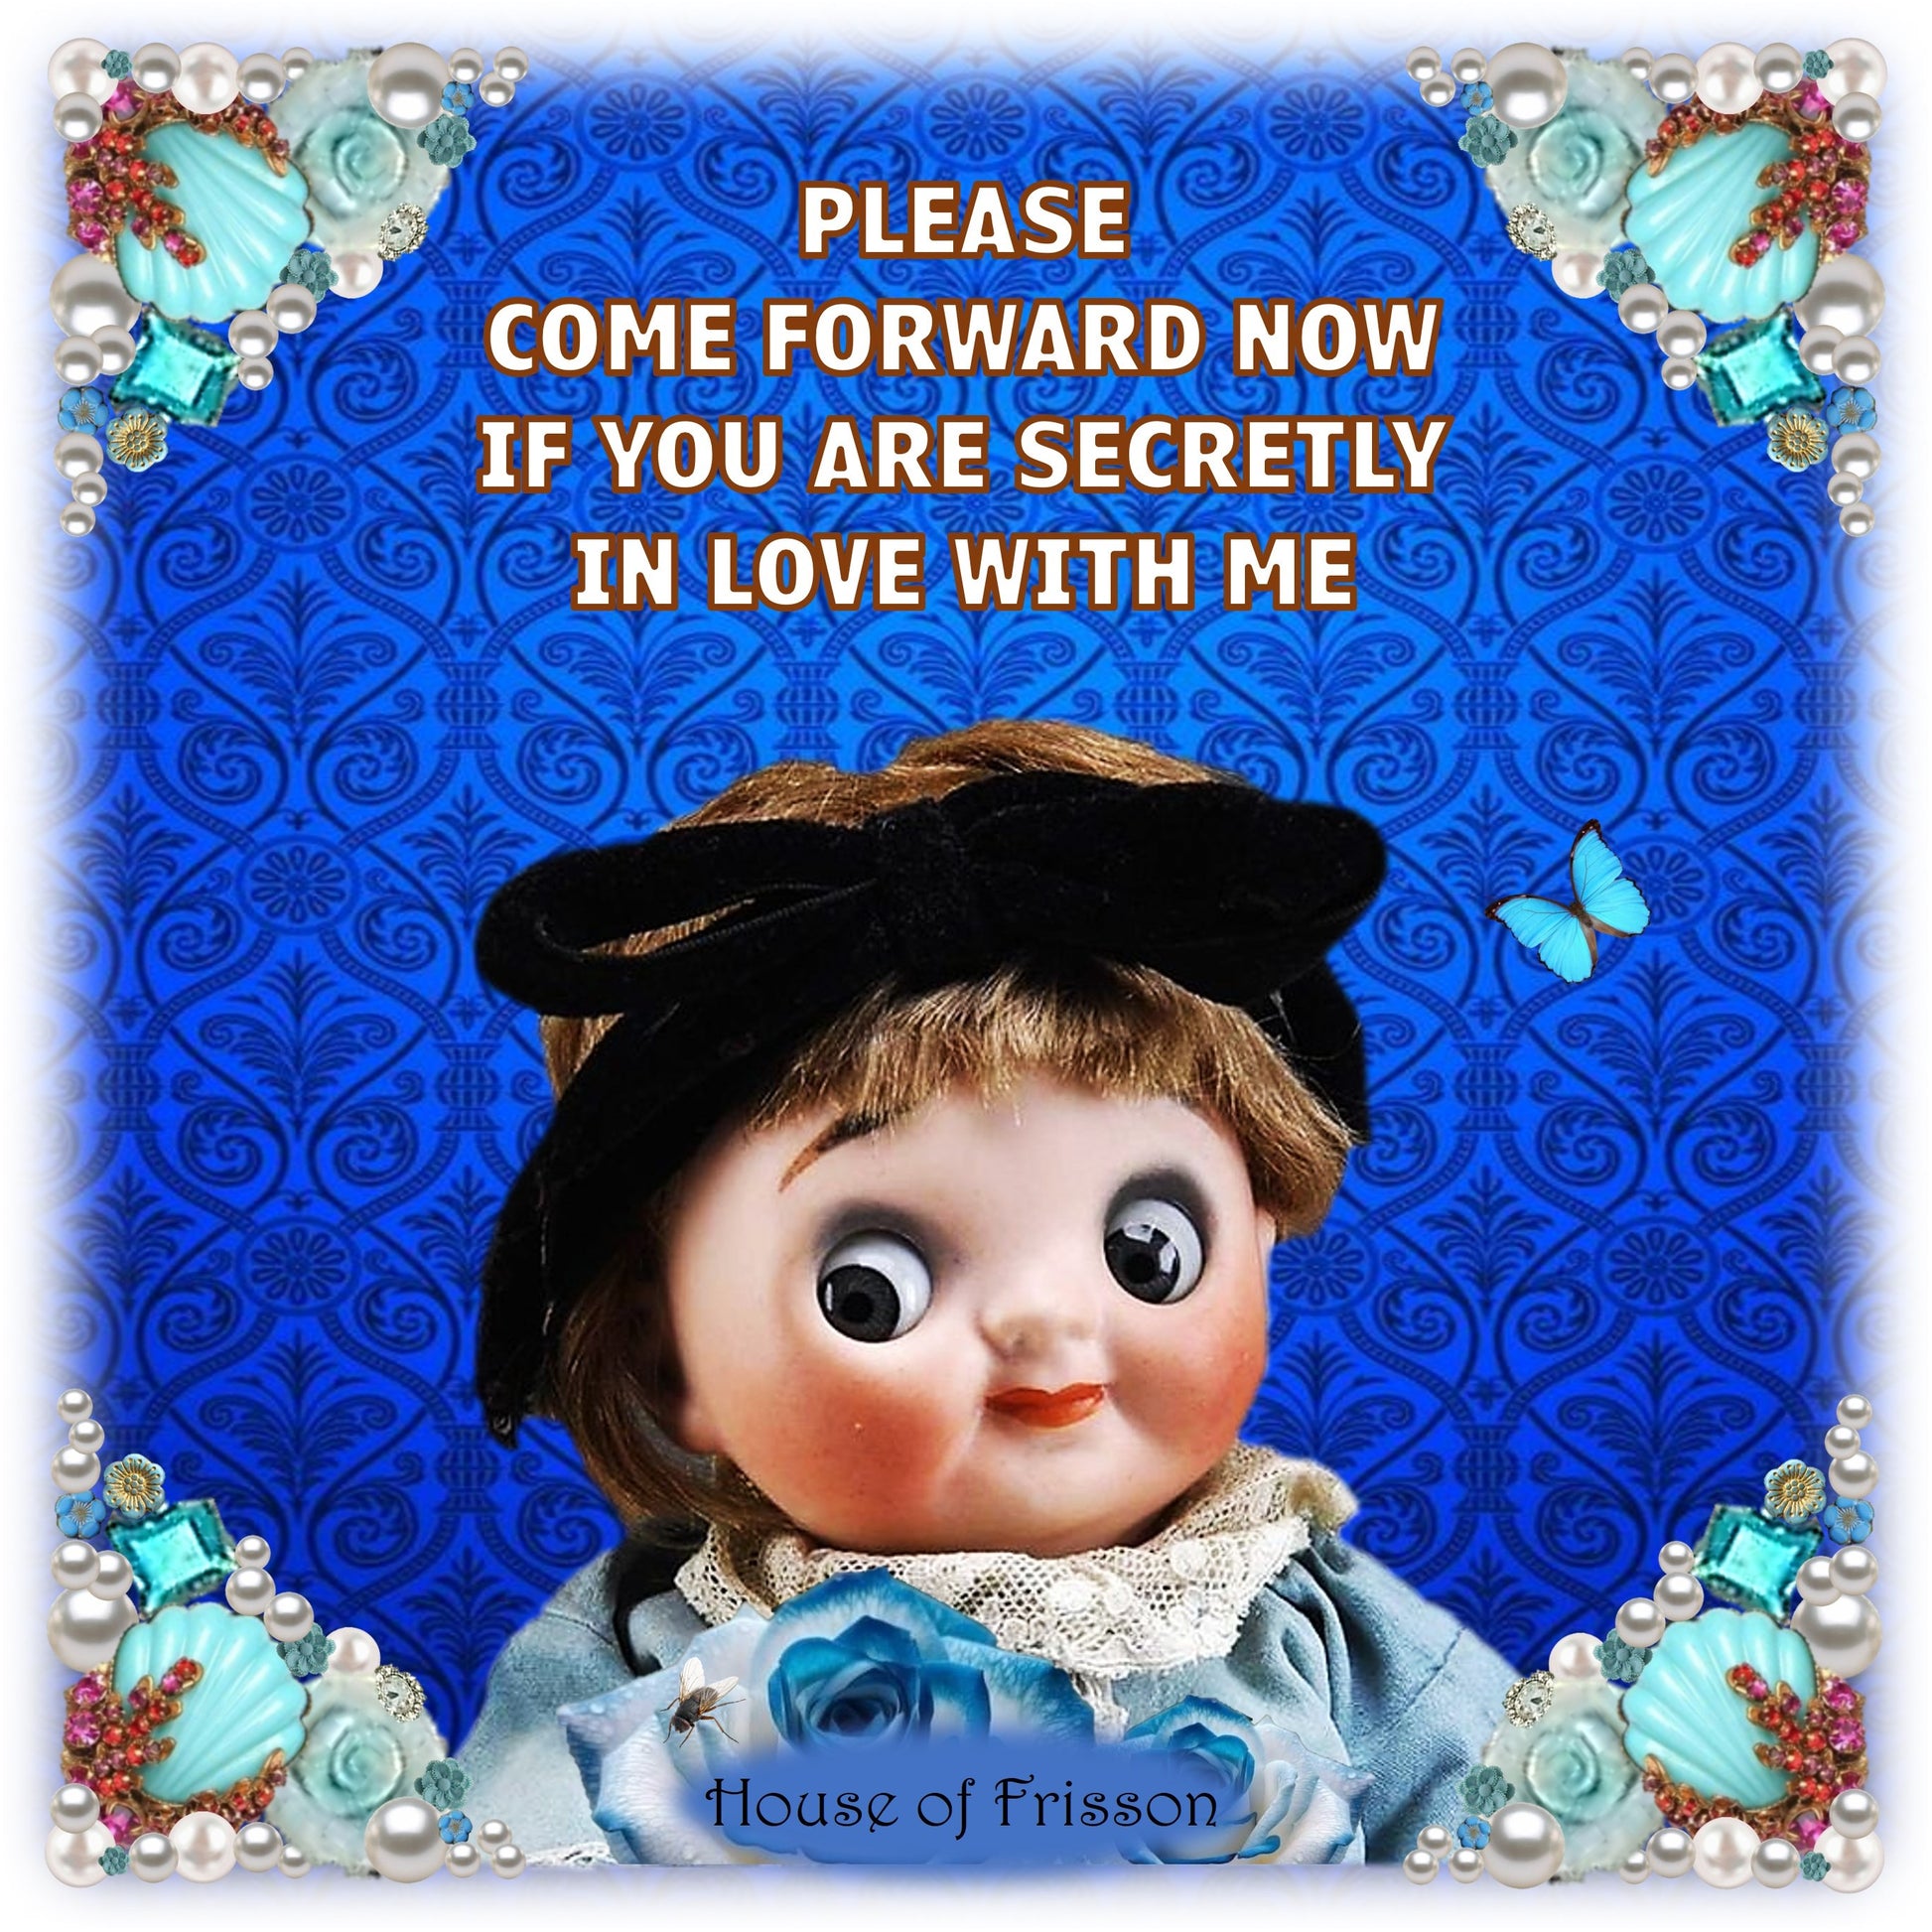 "Please Come Forward Now If You Are Secretly In Love With Me" Greeting Card by House of Frisson